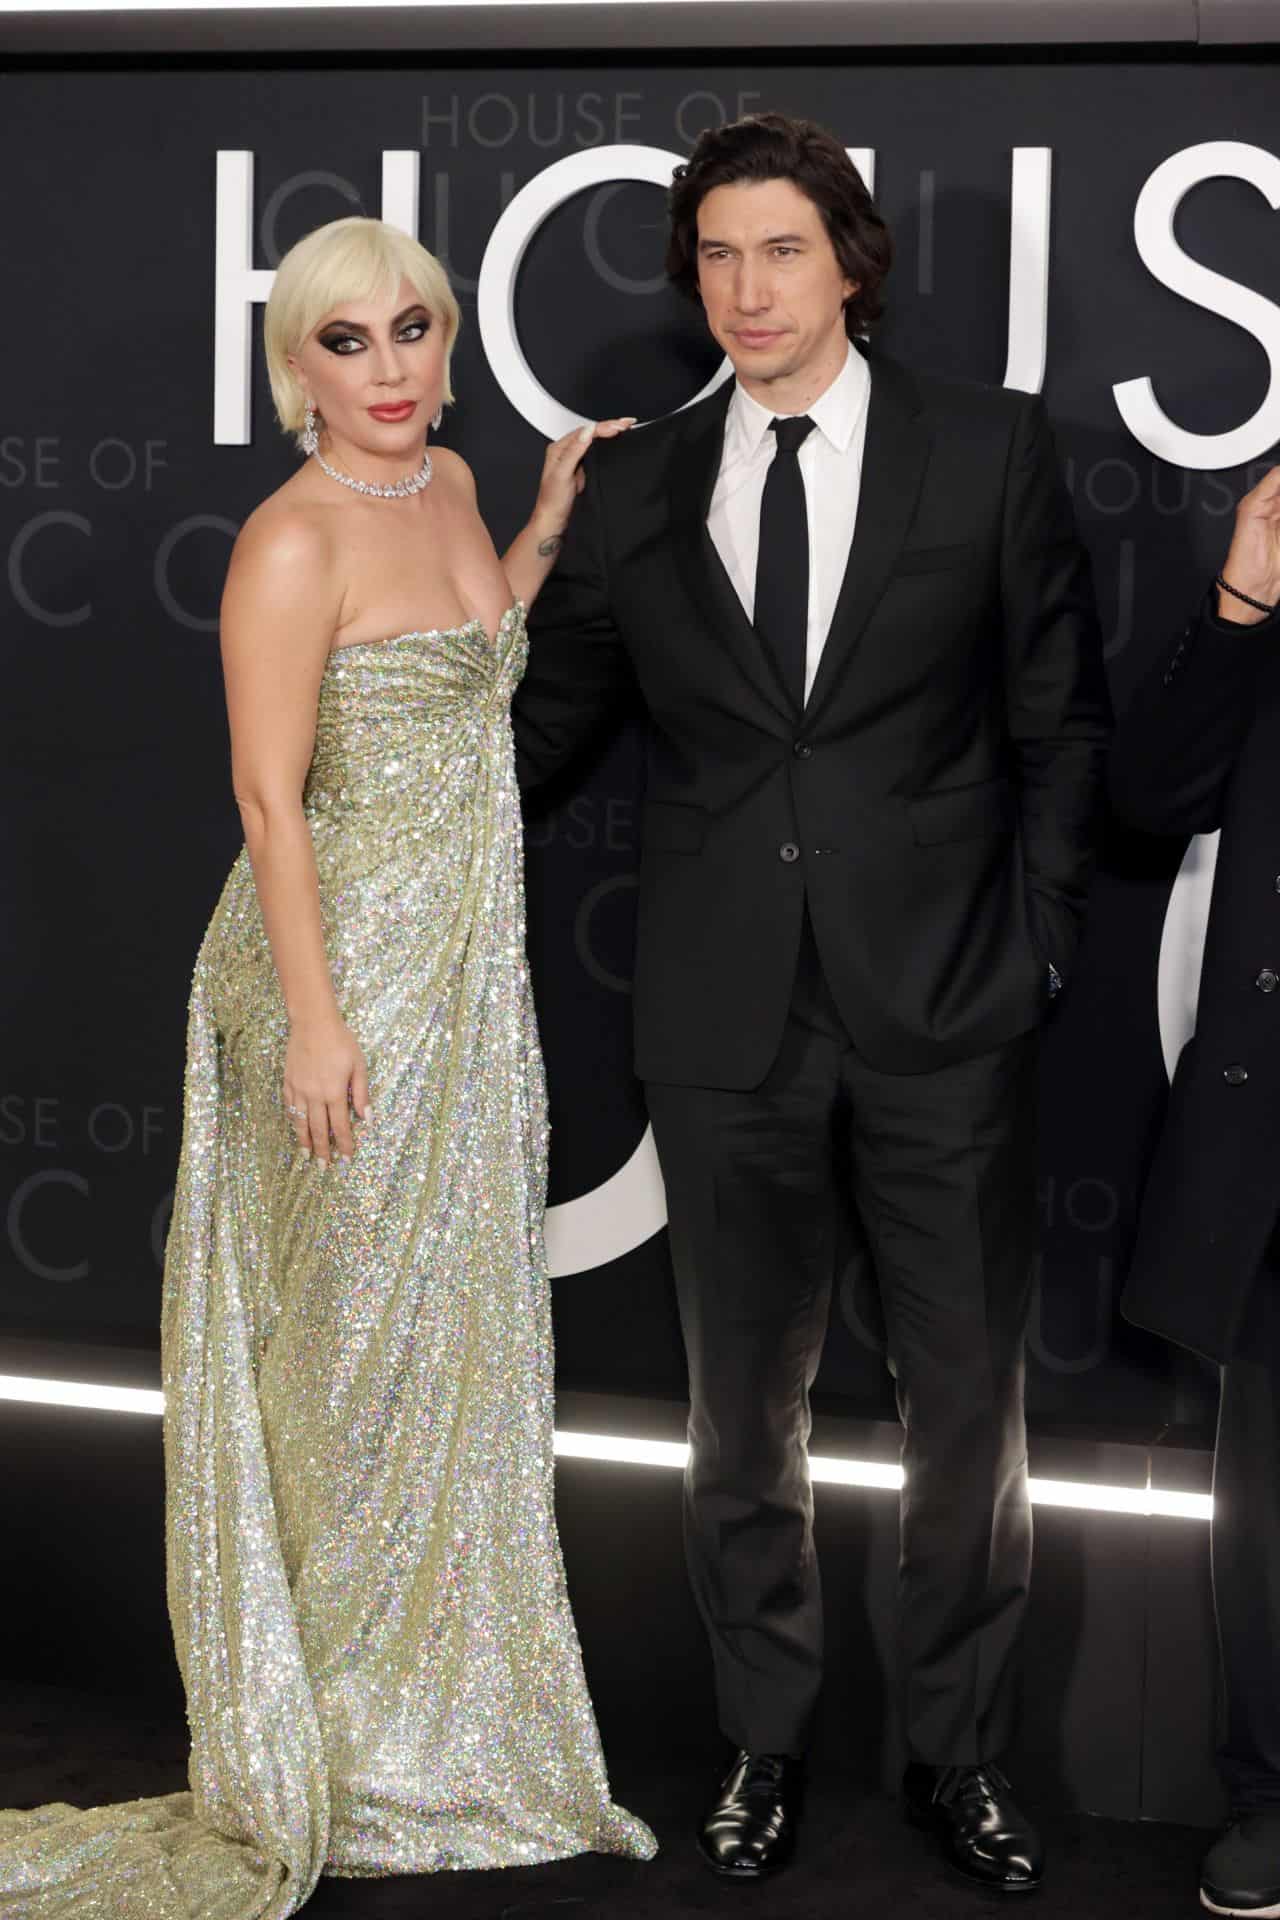 Lady Gaga Wowed All at “House of Gucci” Premiere in Los Angeles